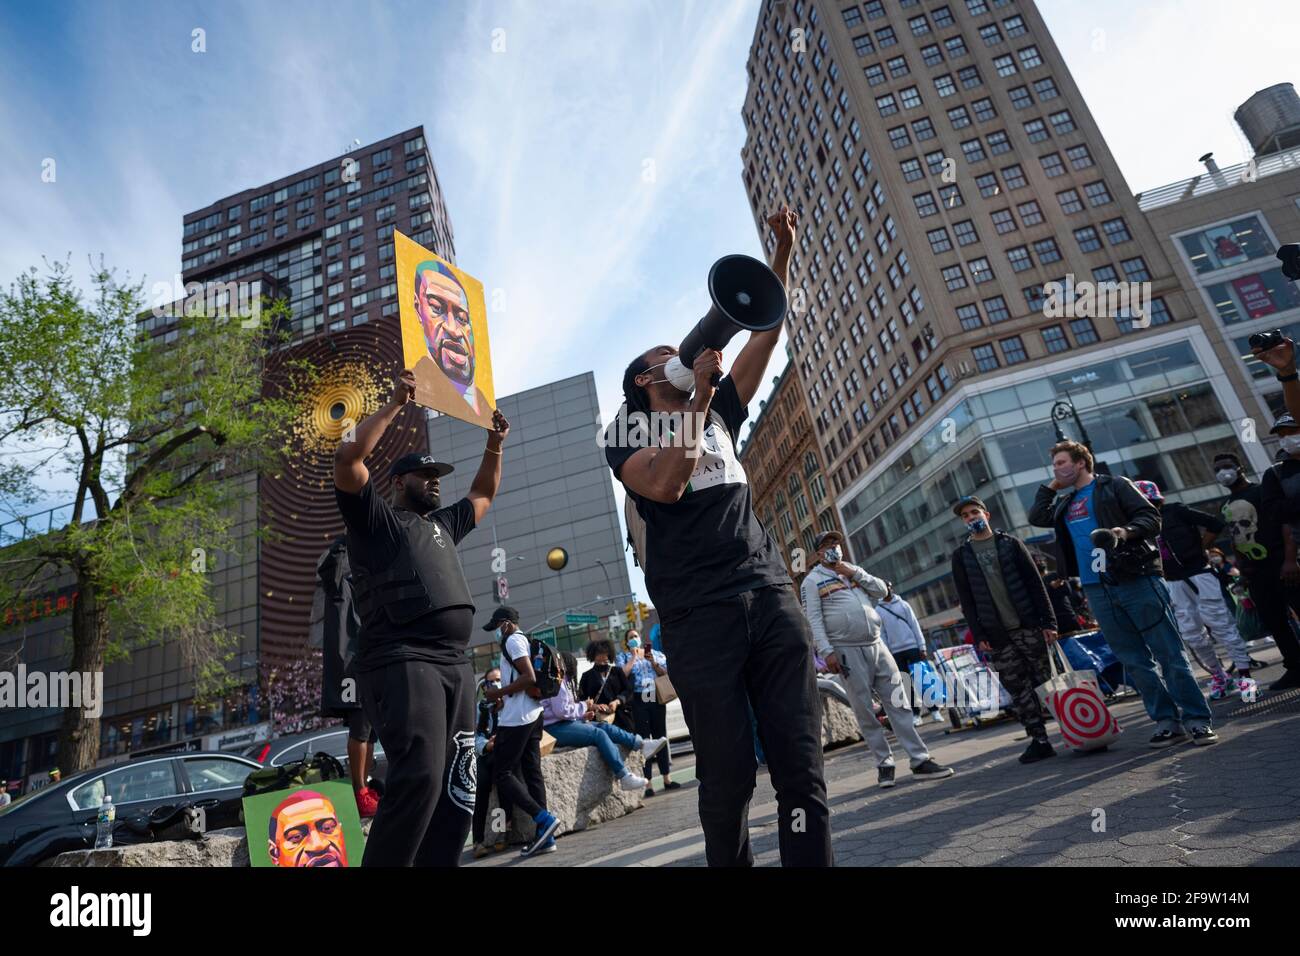 New York, New York, USA 20 April 2021.  Moments after former Minneapolis police officer Derek Chauvin was convicted of murdering George Floyd, defund police activist holds up portrait of Floyd while another speaks to crowd in New York's Union Square. Stock Photo